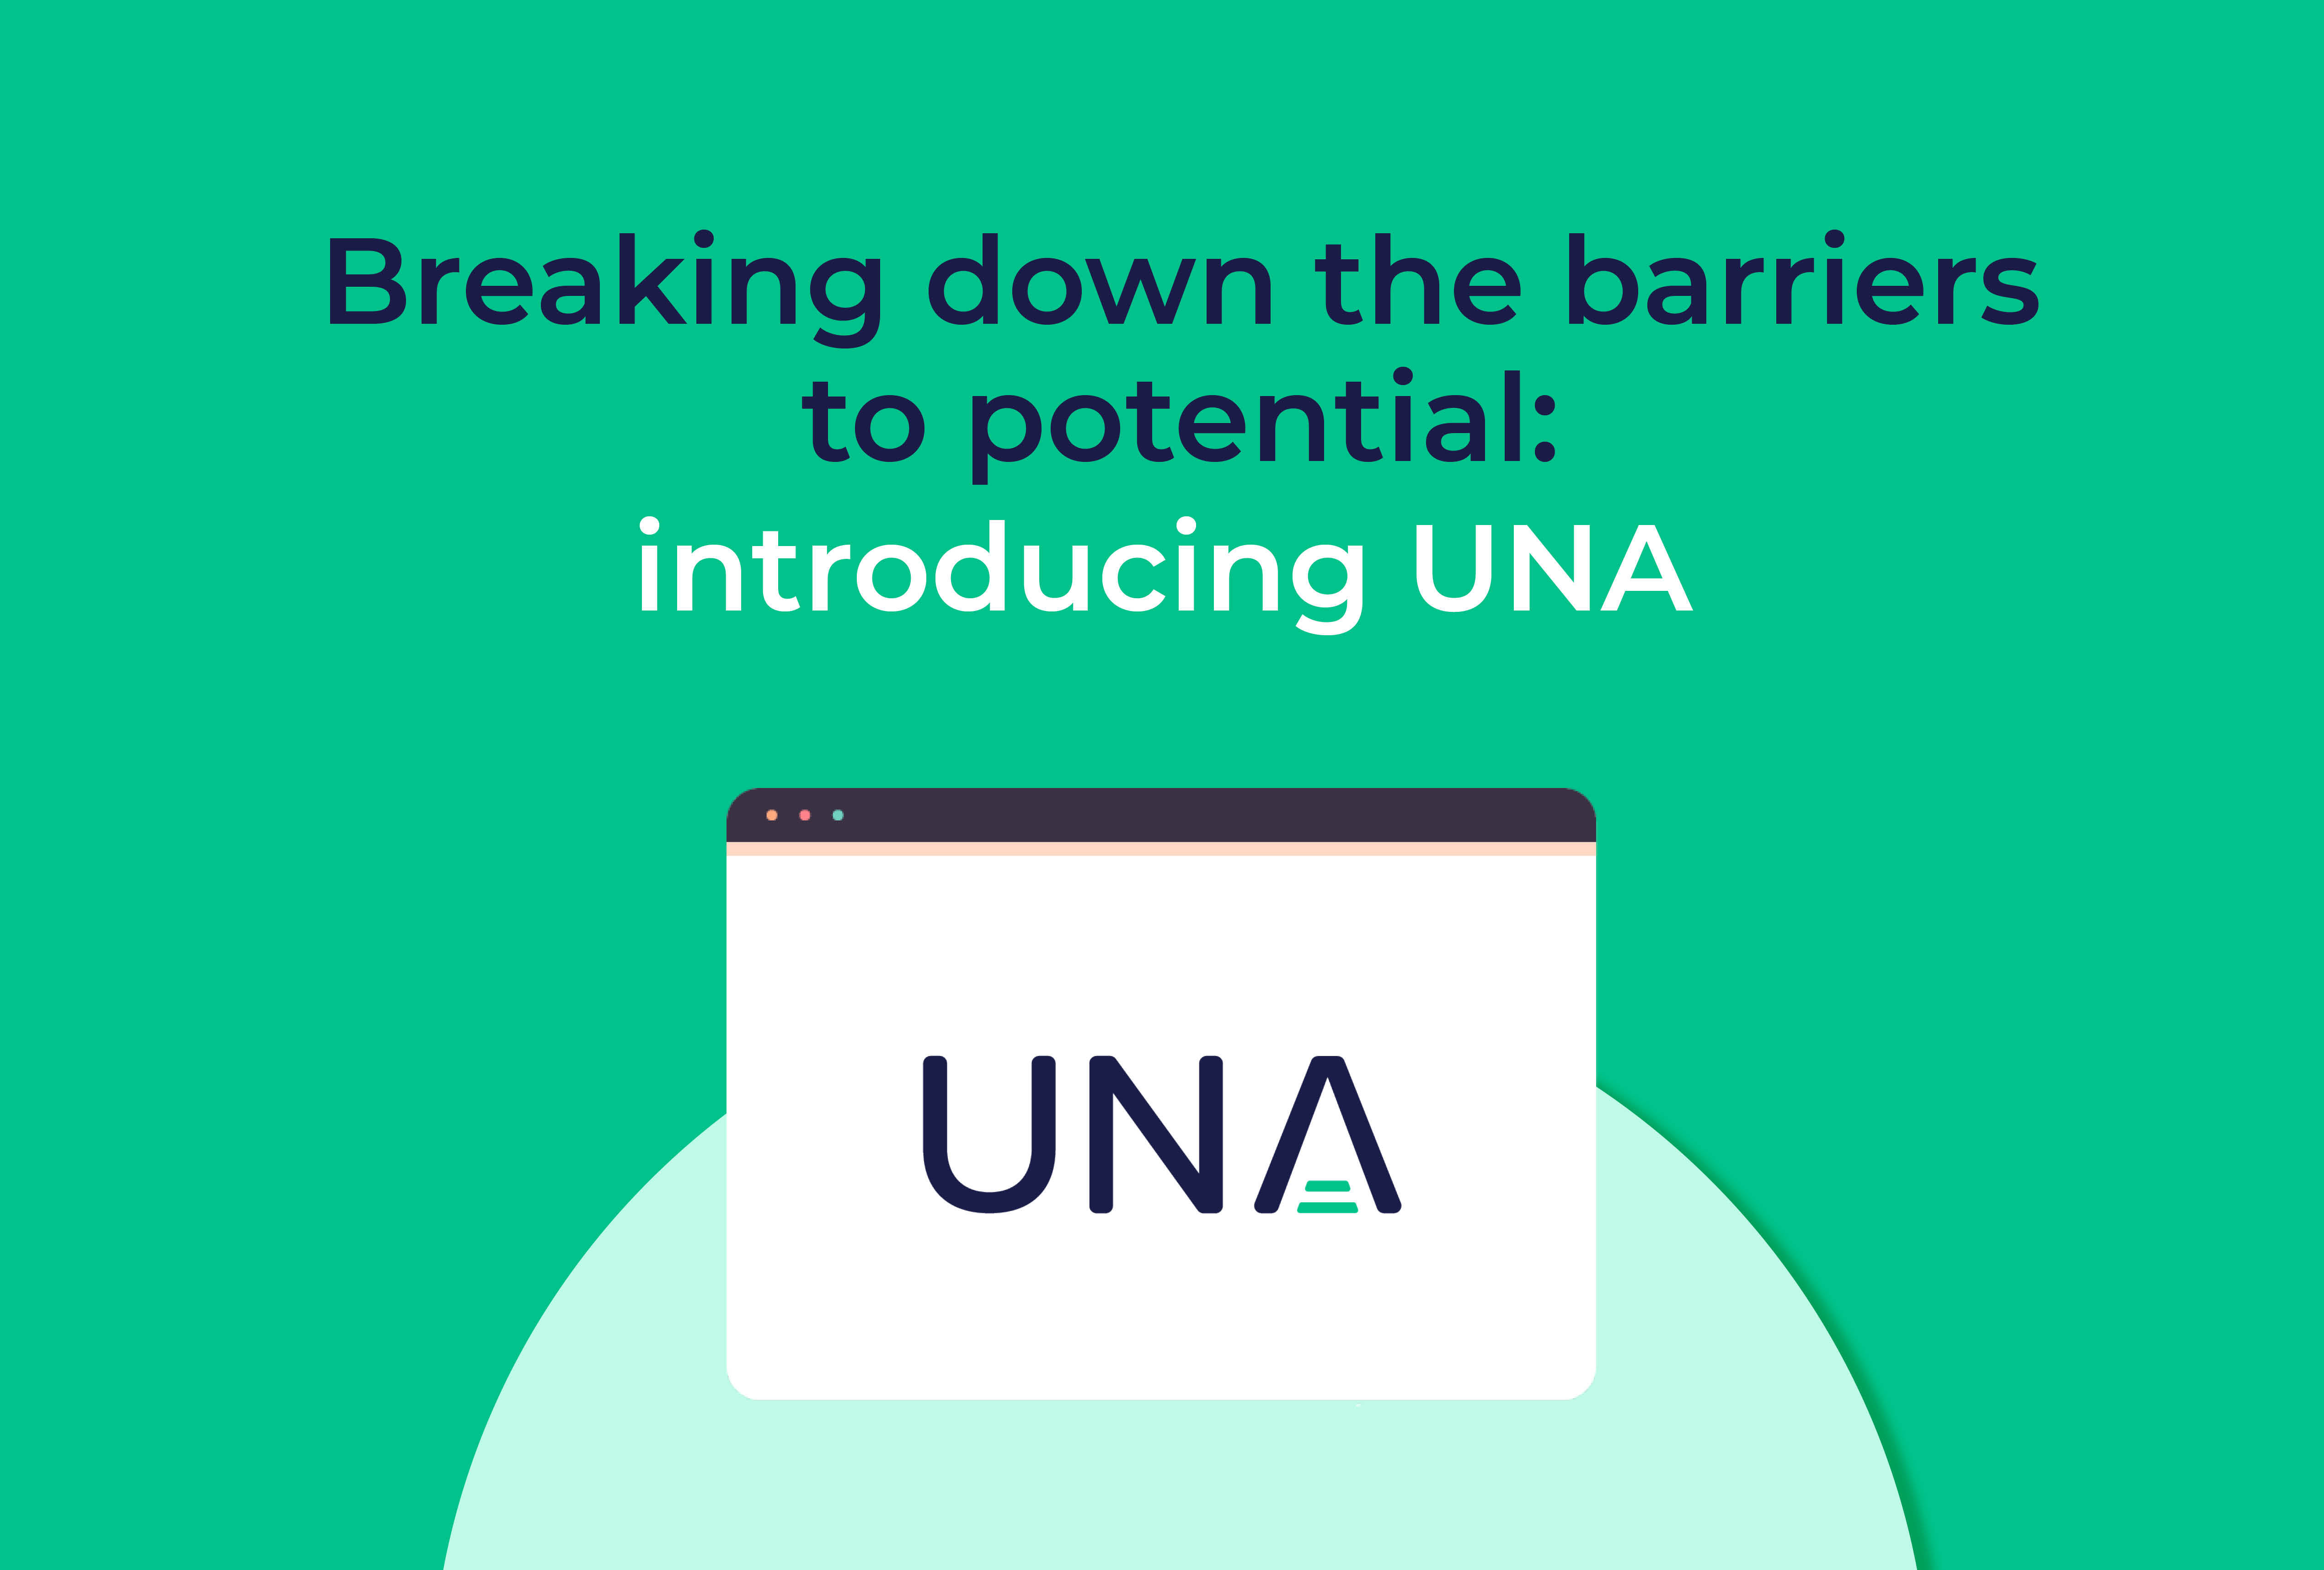 Breaking down the barriers to potential: introducing UNA